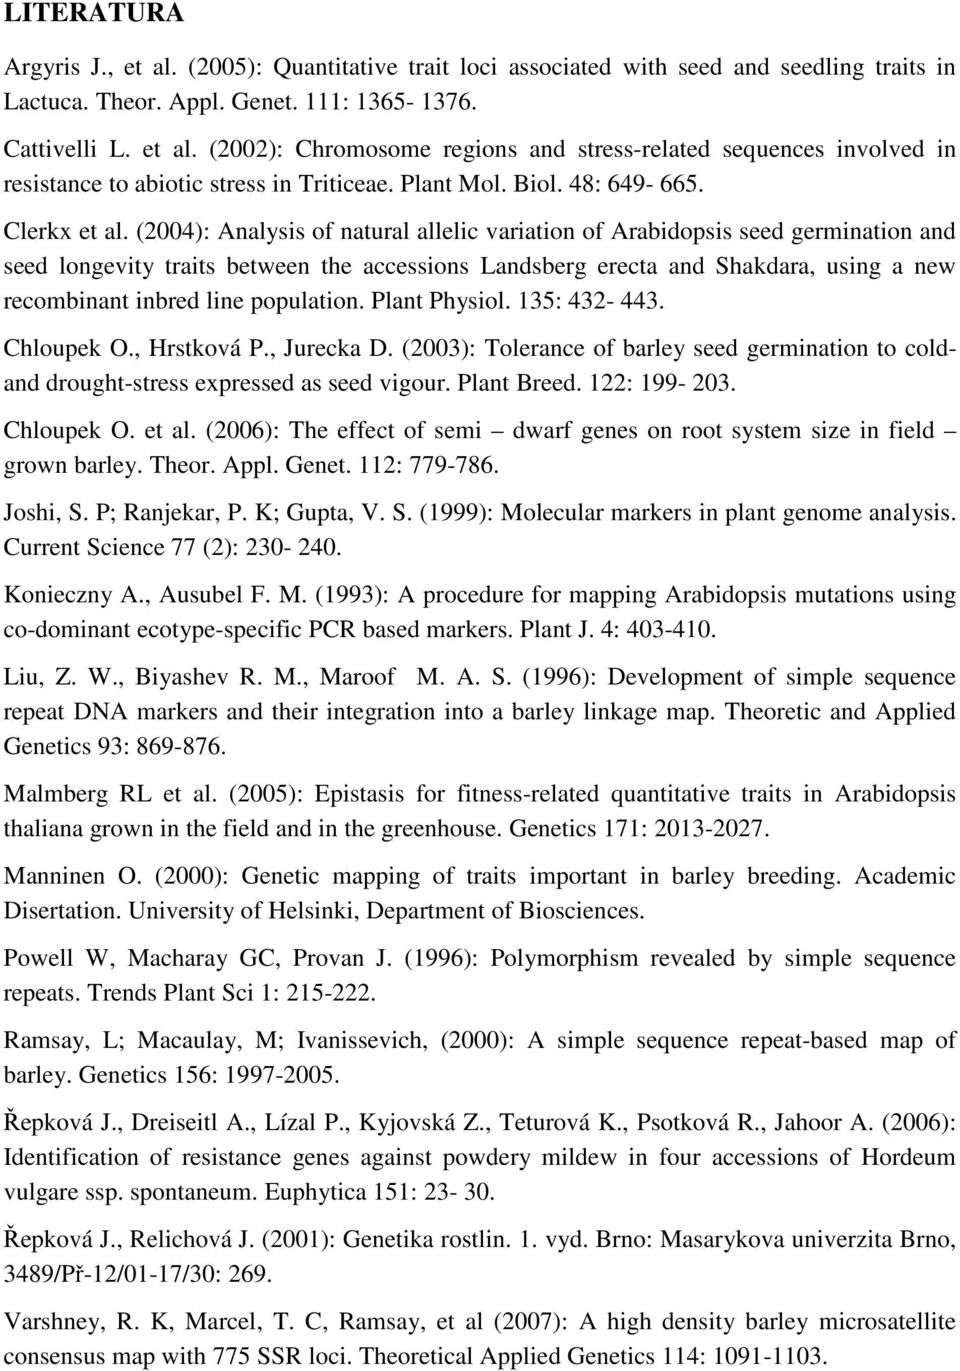 (2004): Analysis of natural allelic variation of Arabidopsis seed germination and seed longevity traits between the accessions Landsberg erecta and Shakdara, using a new recombinant inbred line